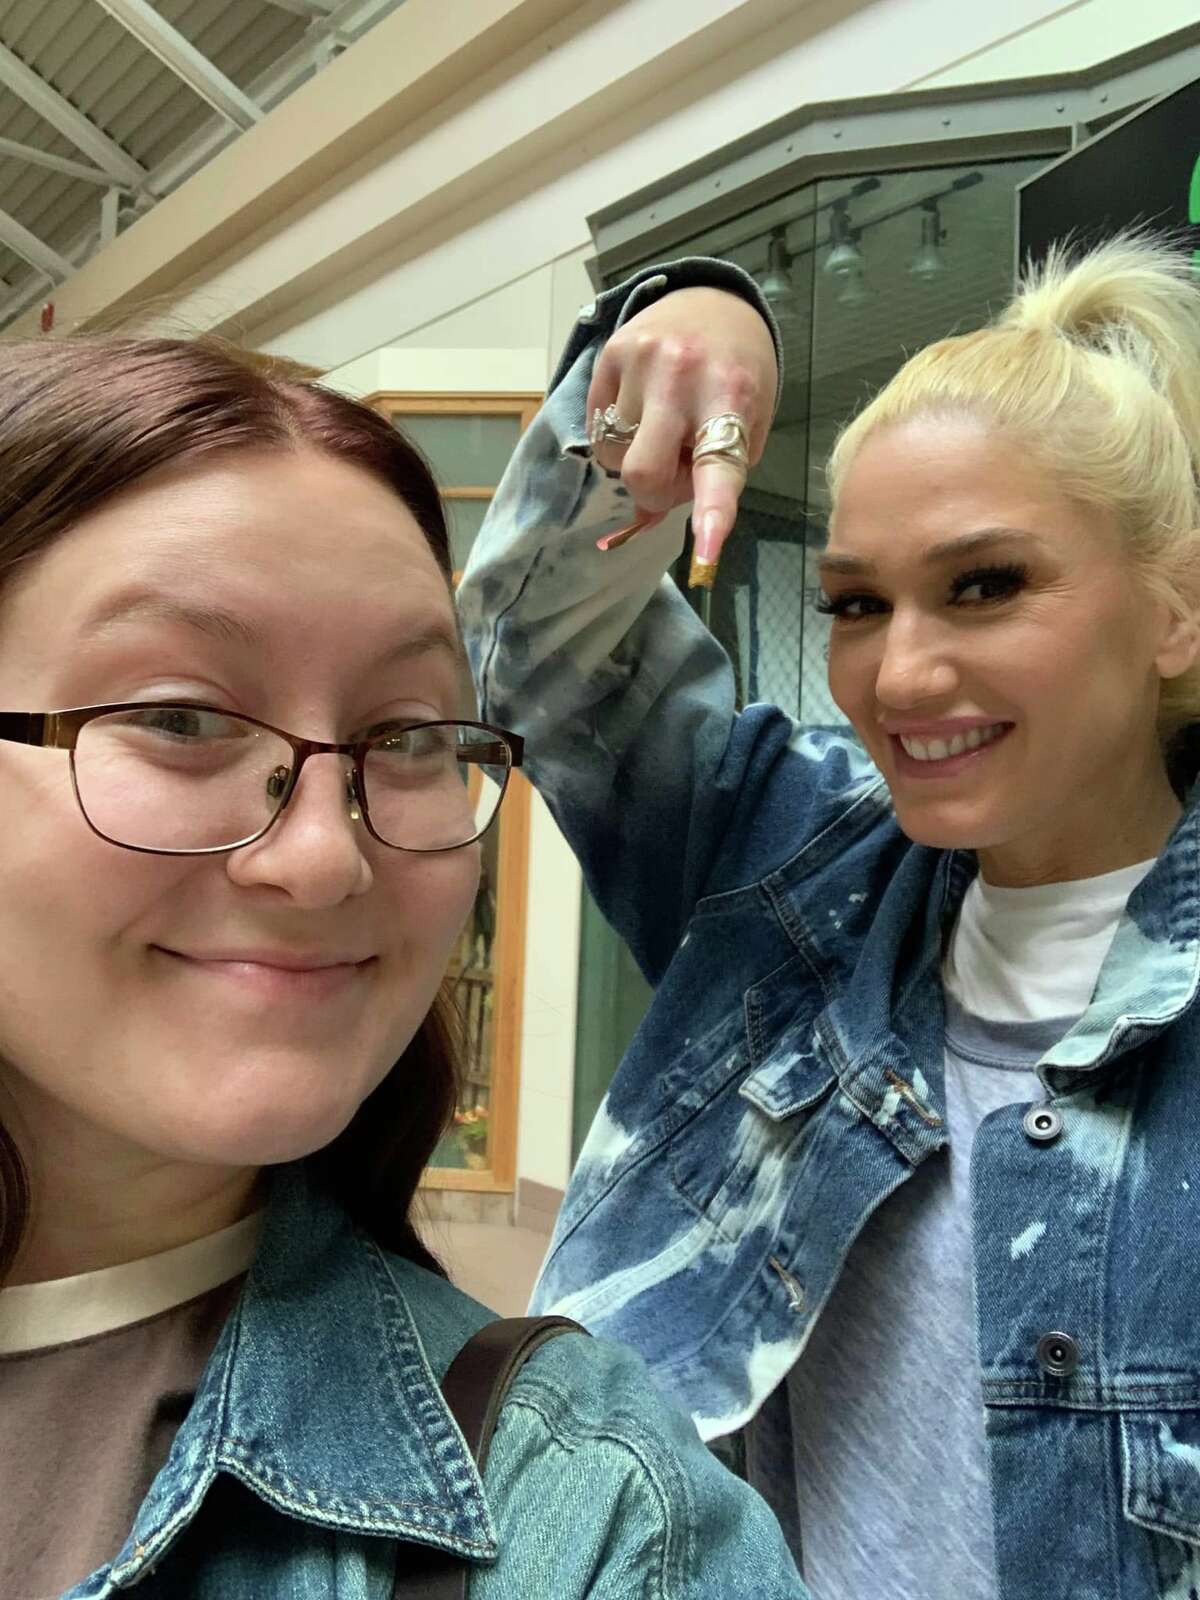 From left, Lauryn Grace met Gwen Stefani at the Midland Mall on Saturday, Aug. 13.